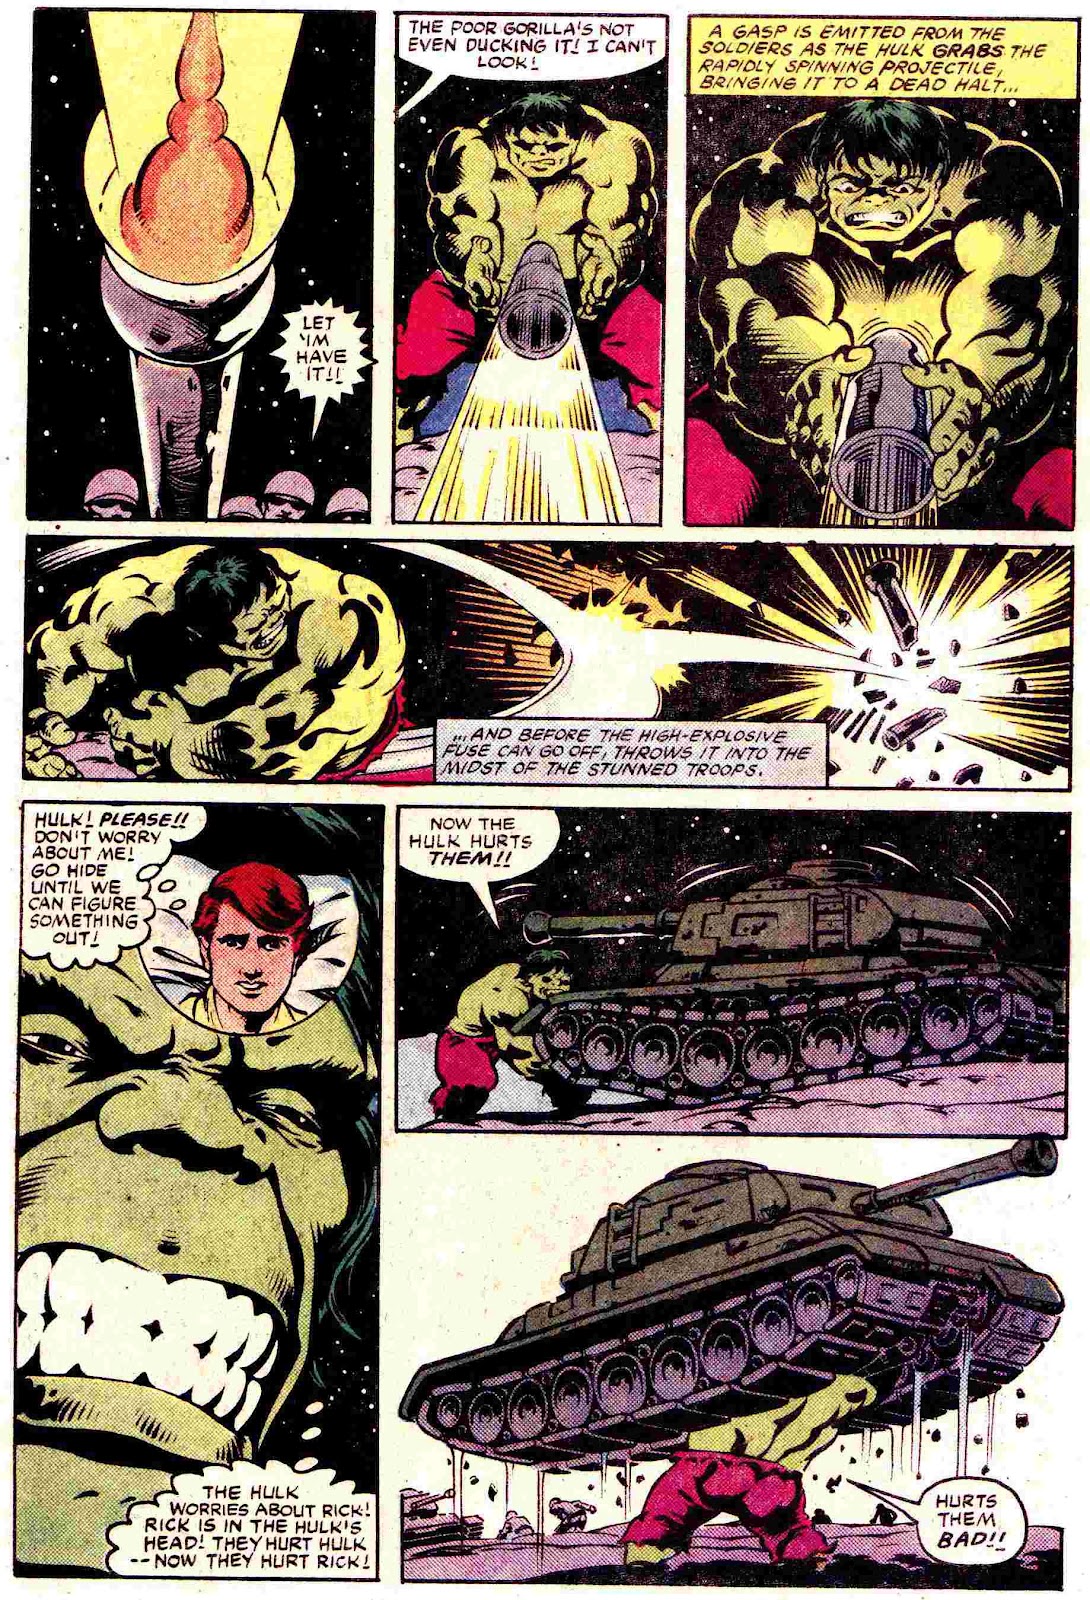 What If? (1977) issue 45 - The Hulk went Berserk - Page 14